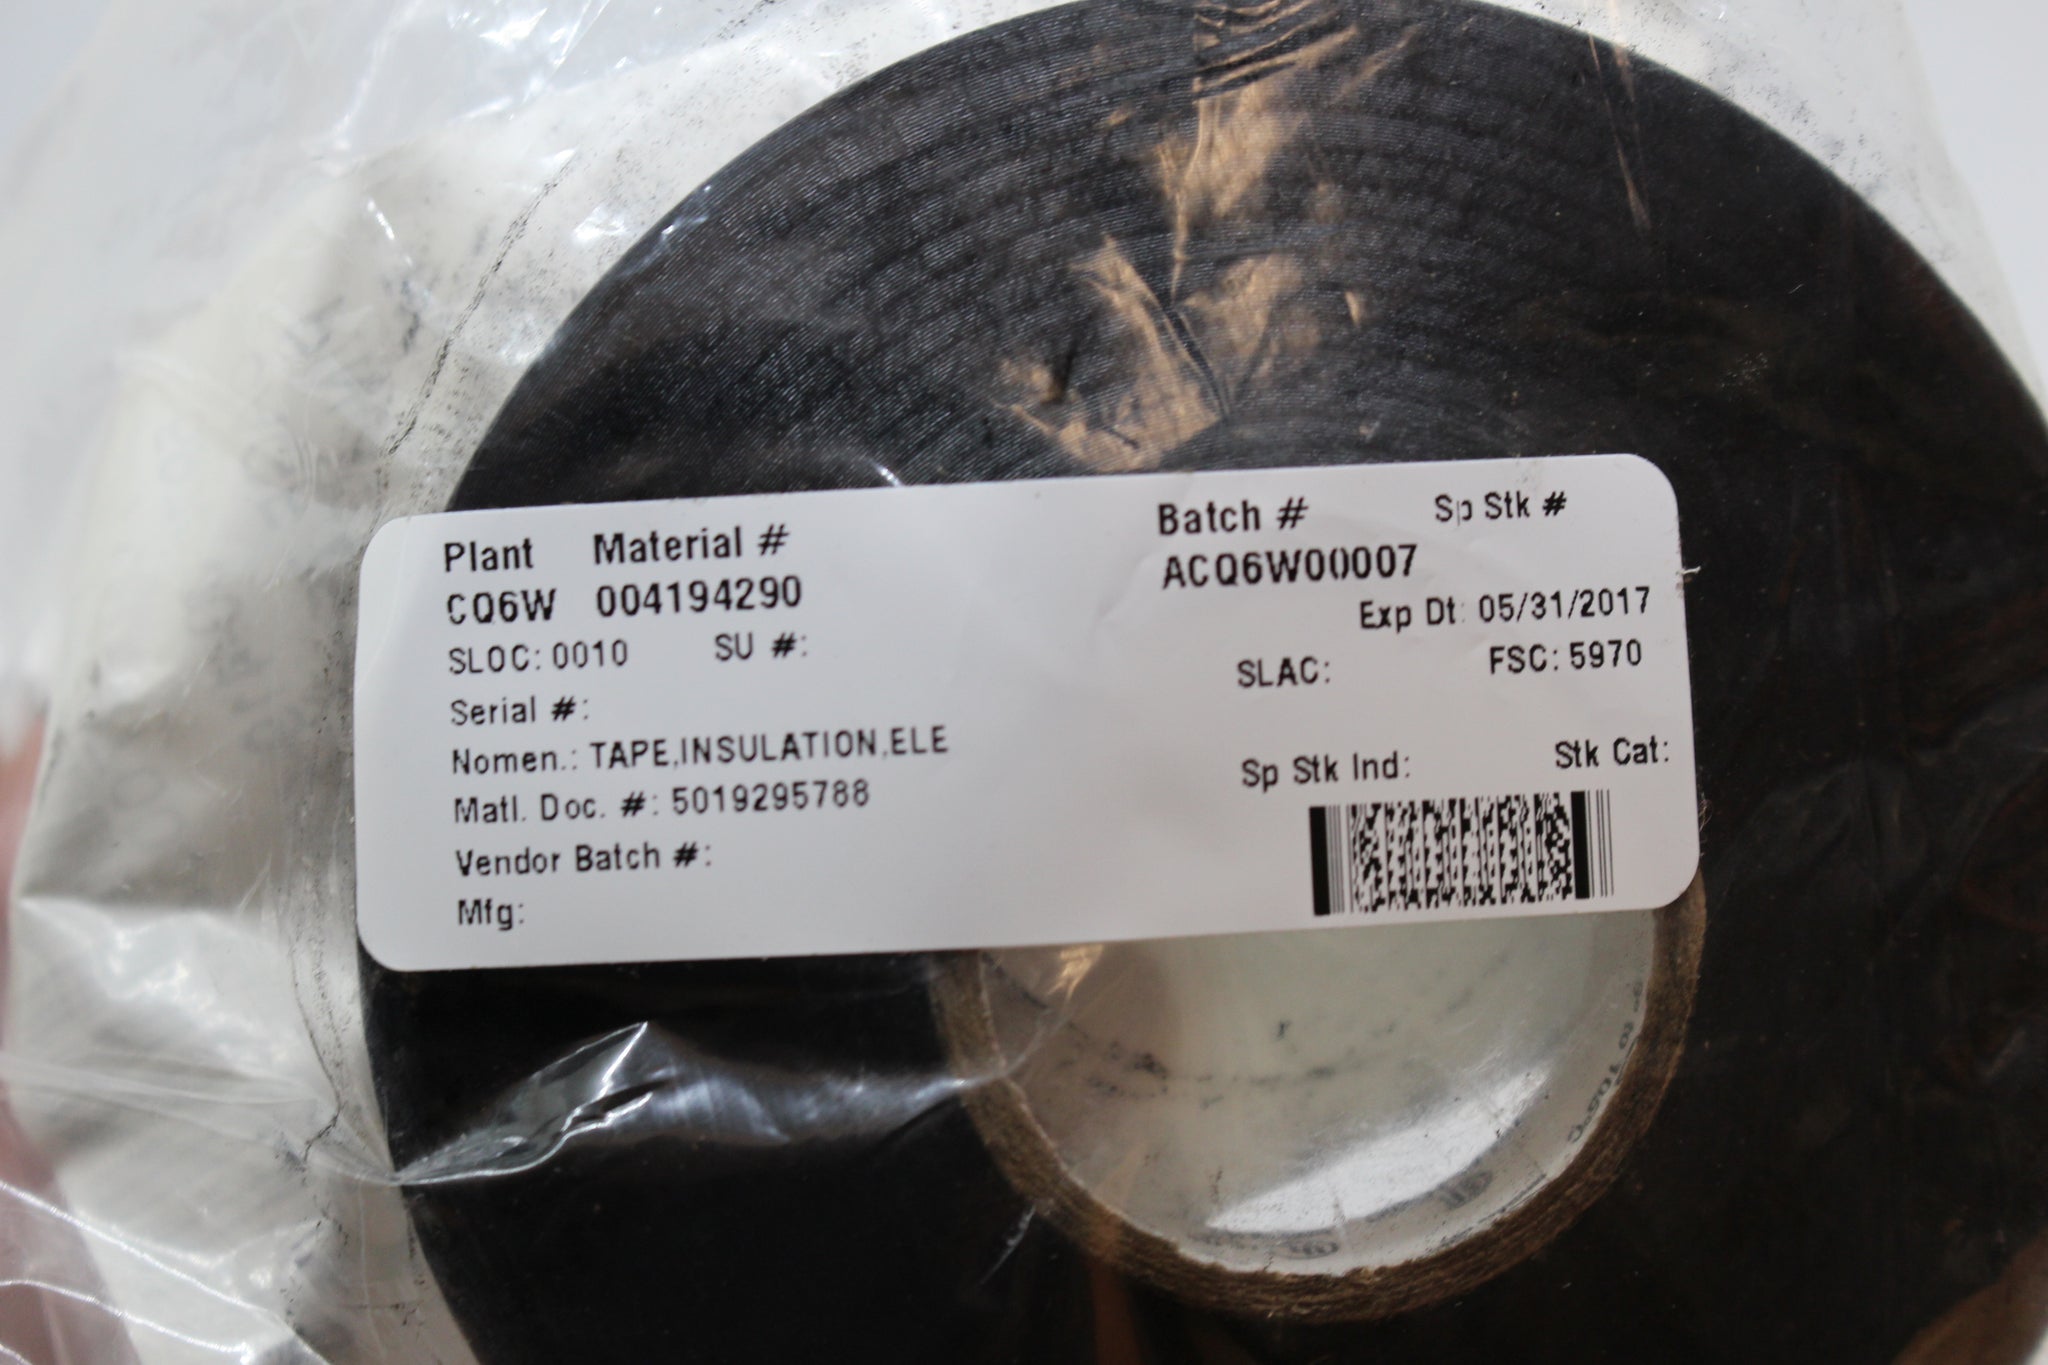 Electrical Flame Retardant Insulation Tape #37, 5970-00-419-4290, P/N –  Military Steals and Surplus